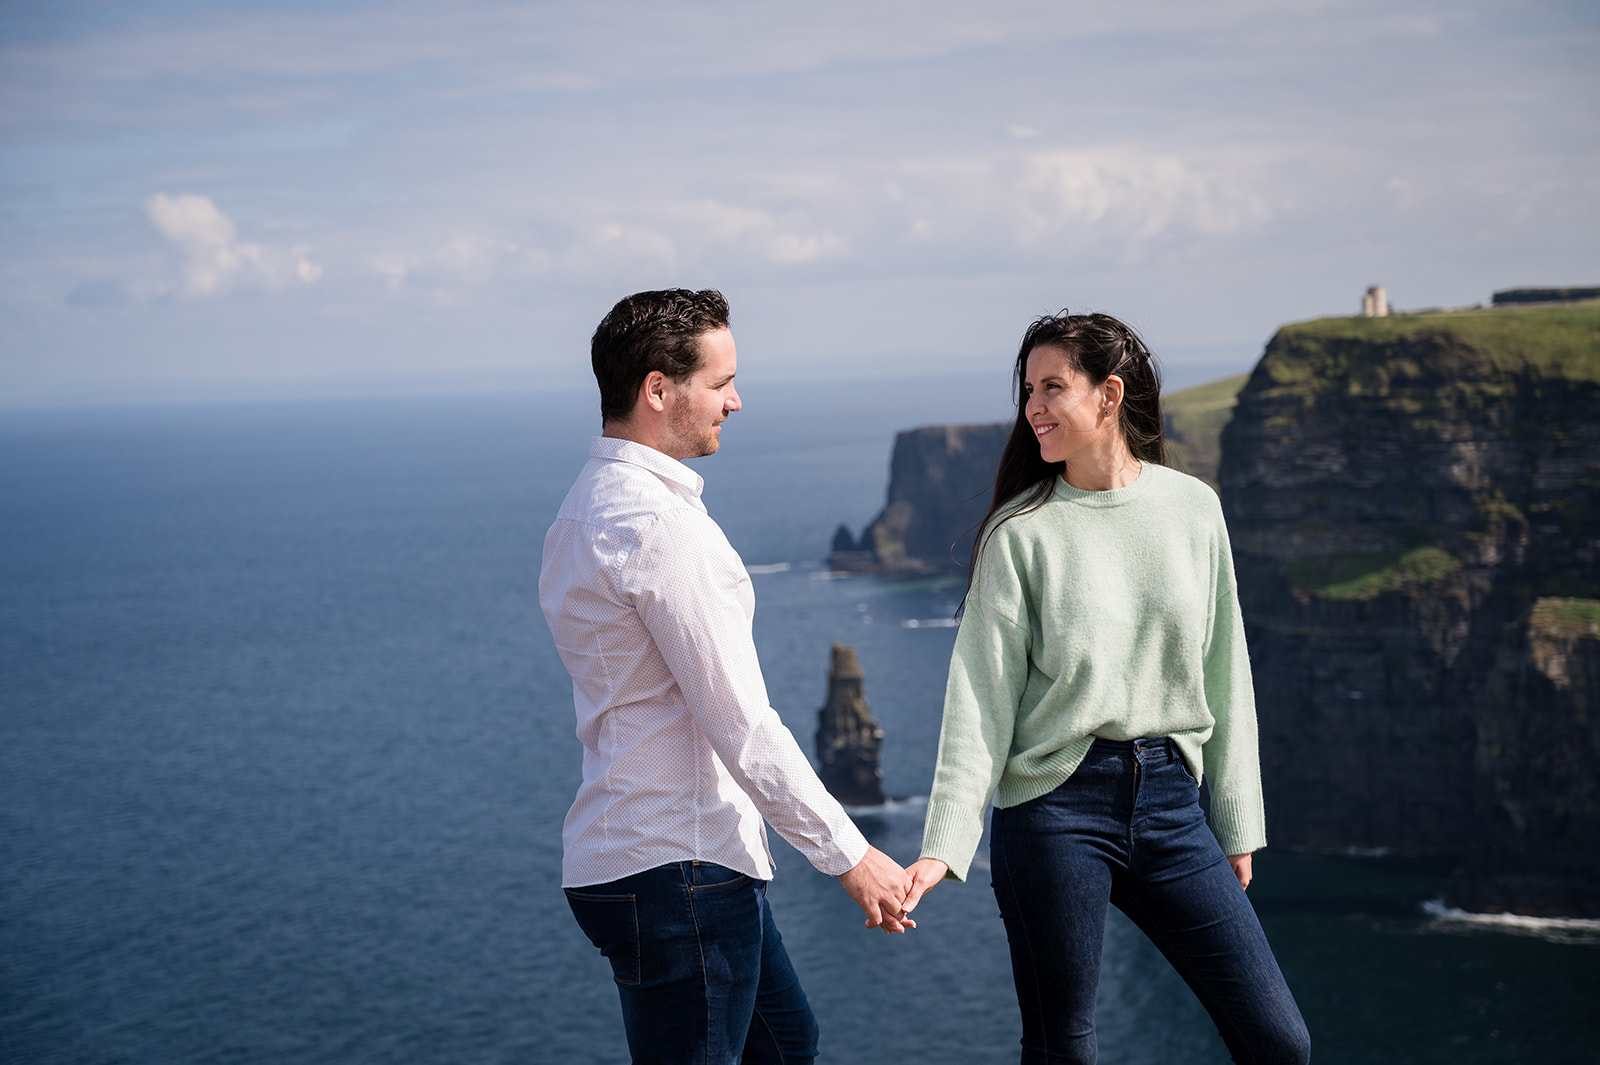 Cliffs of Moher Couples Shoot